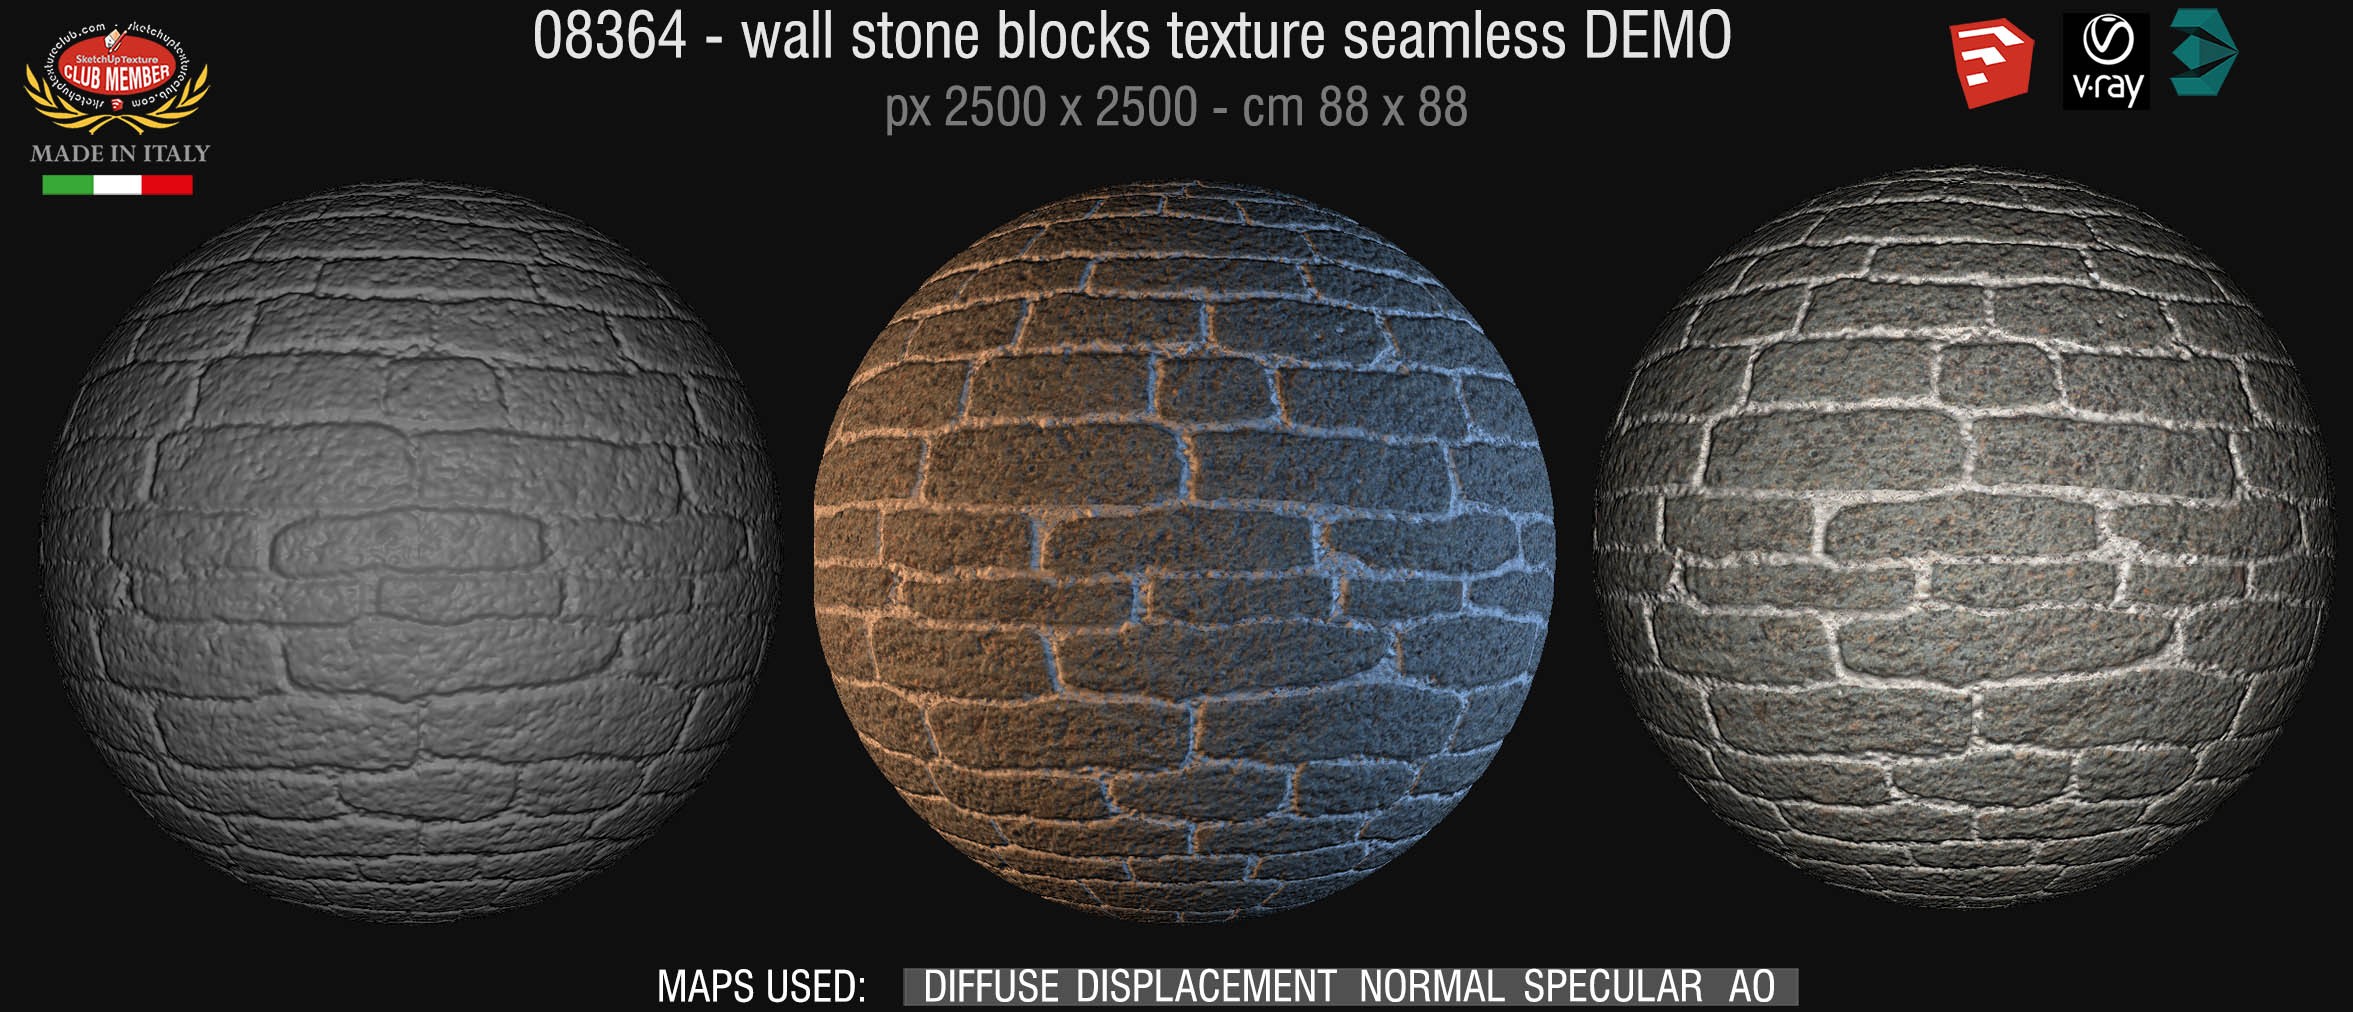 08364 HR Wall stone with regular blocks texture + maps DEMO